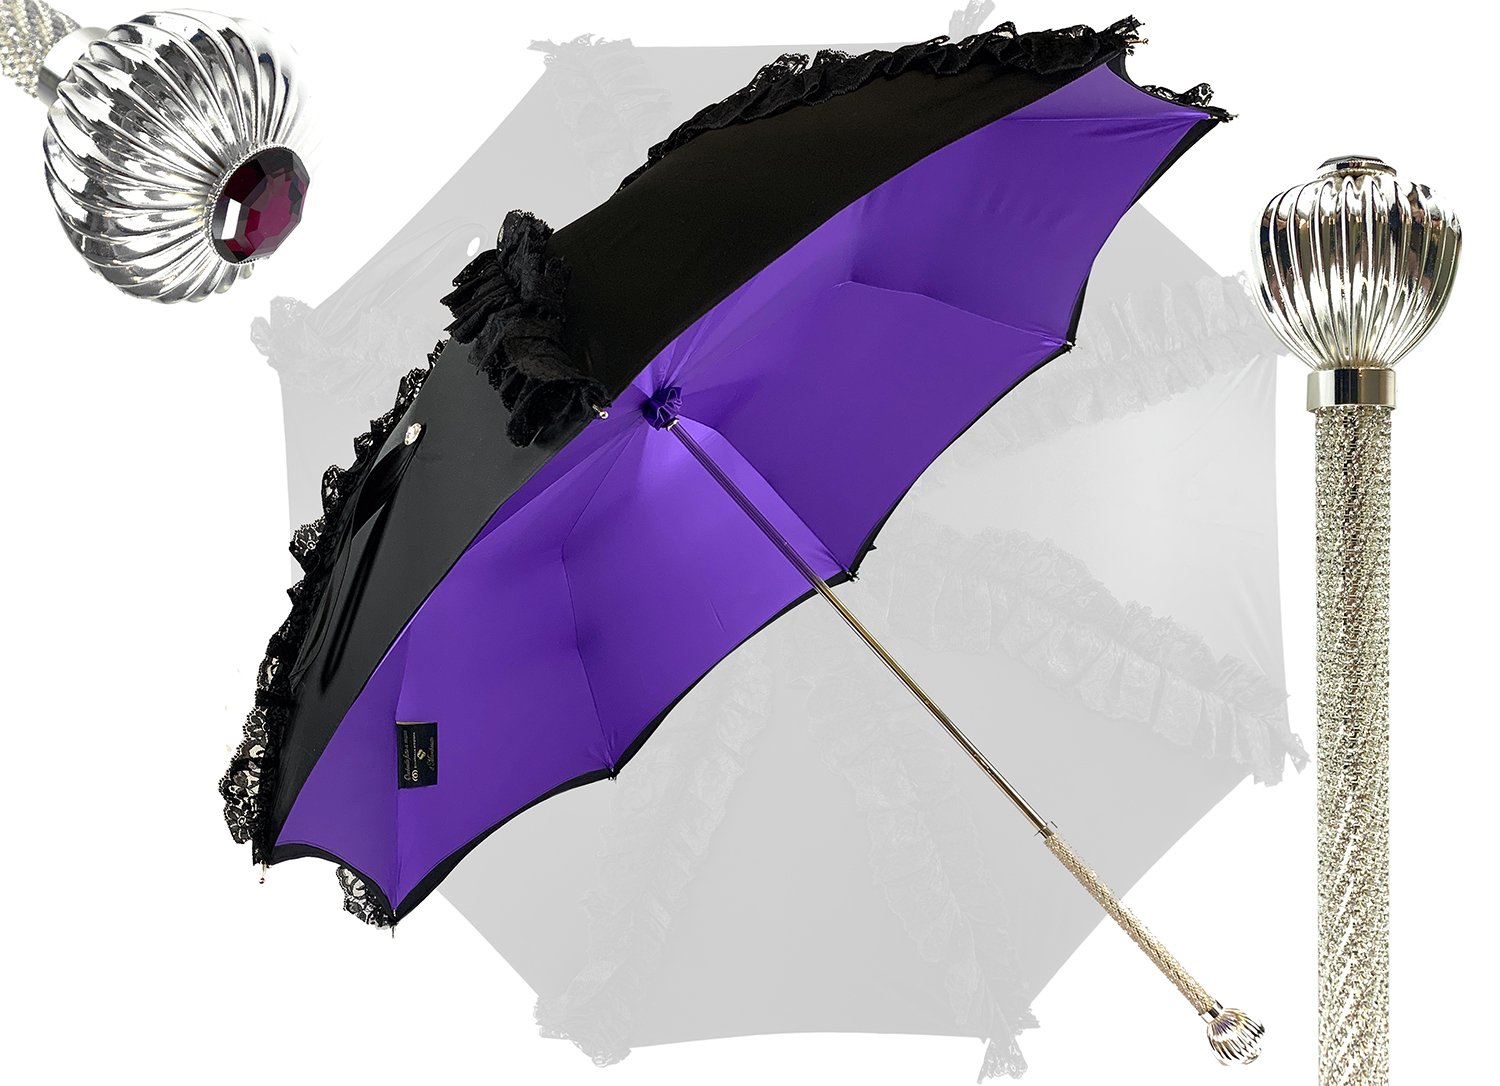 Limited collection - umbrella with Black lace - exclusive "ilMarchesato" - IL MARCHESATO LUXURY UMBRELLAS, CANES AND SHOEHORNS